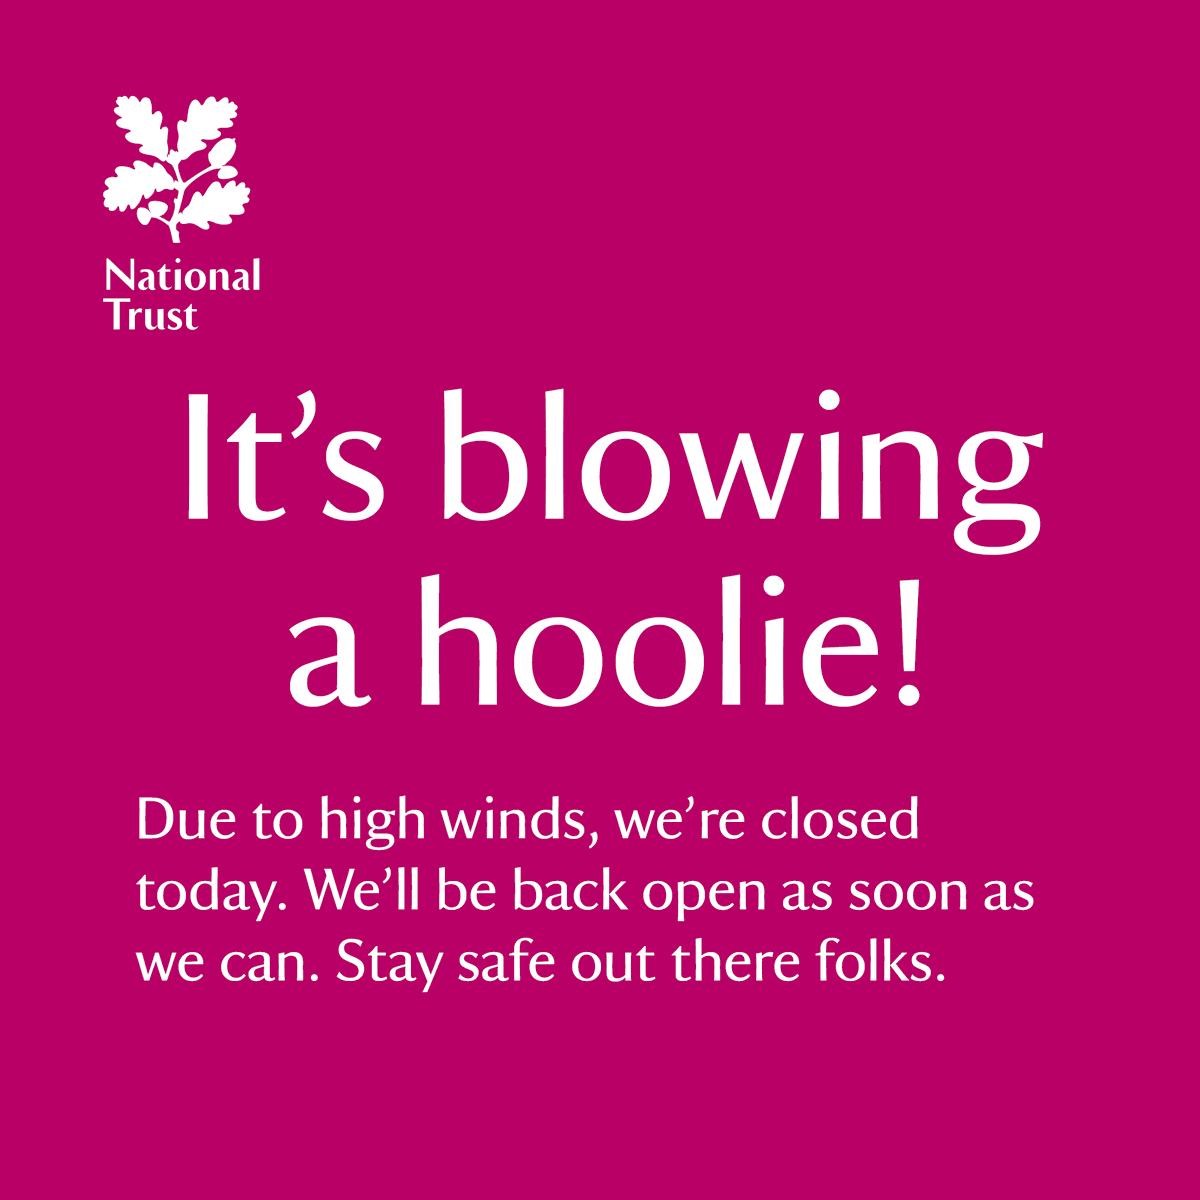 🌧⚠️ Due to forecast high wind speeds, Hidcote will be closed on Sunday 7 April for your safety. We anticipate opening as normal from Monday 8 April. Thank you for your understanding.